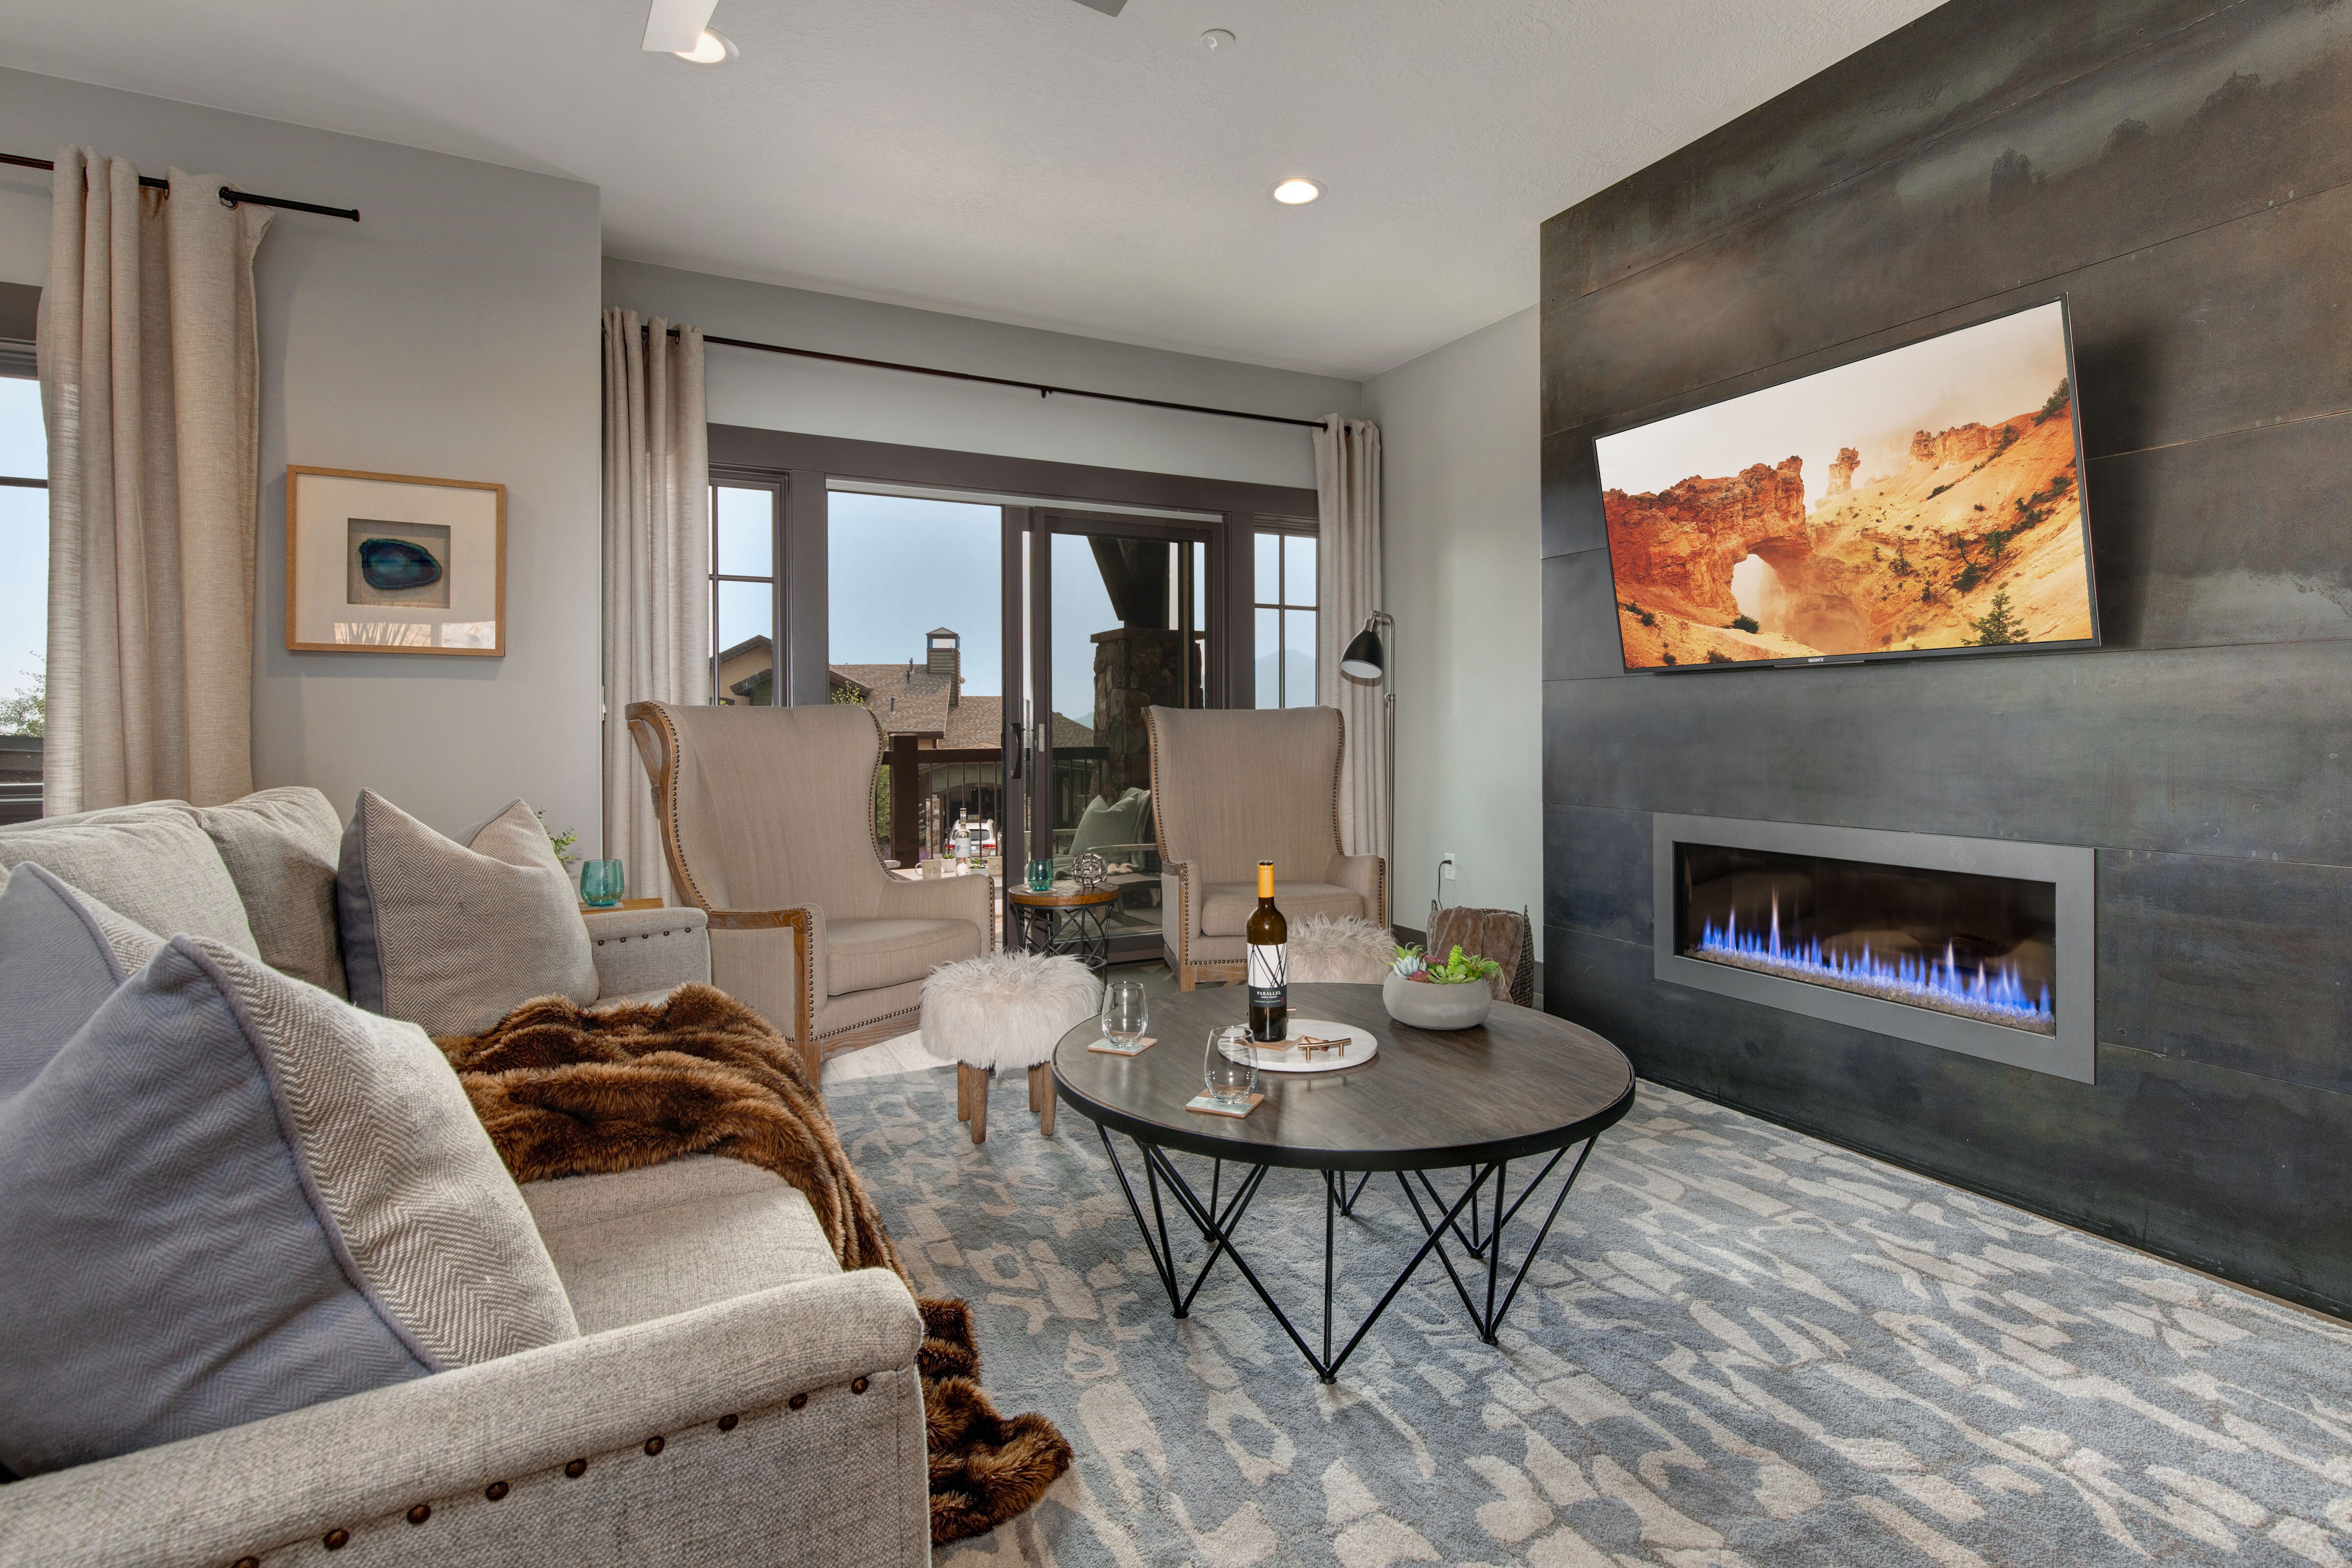 Living Room with plush contemporary furnishings, modern gas fireplace, Sony smart tv, and private balcony access